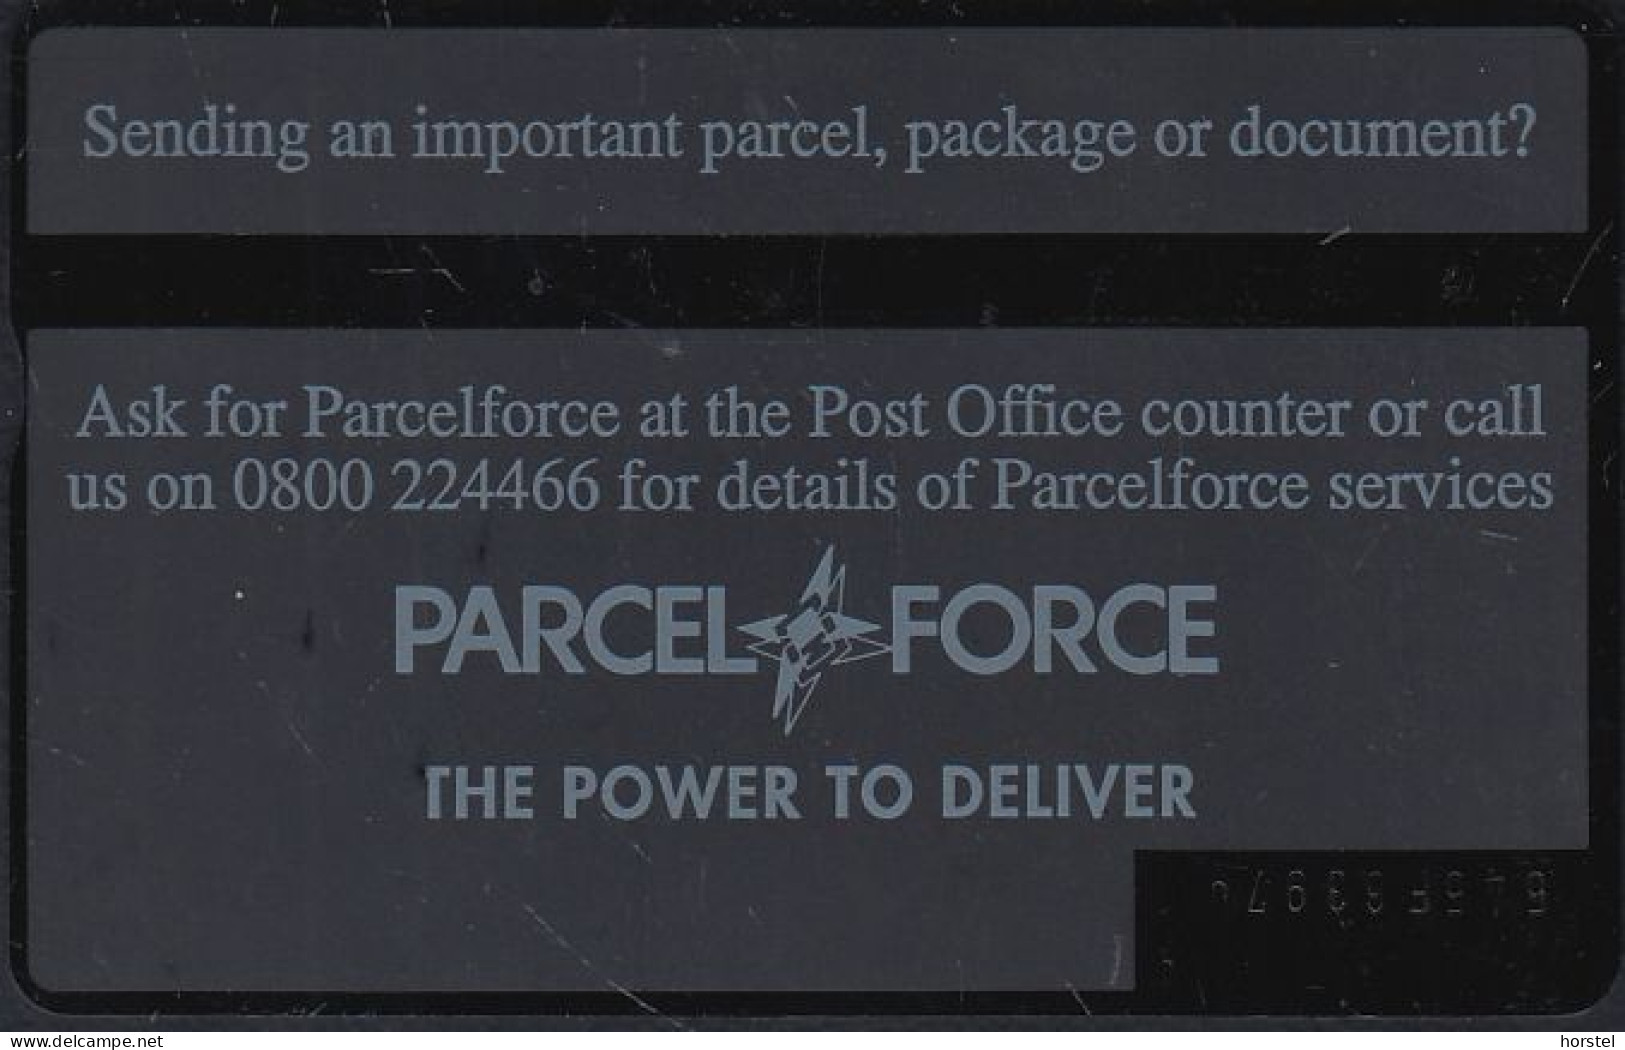 UK Bta 098 Post Office Counter - Parcelforce - World - 20 Units - 545F - BT Advertising Issues